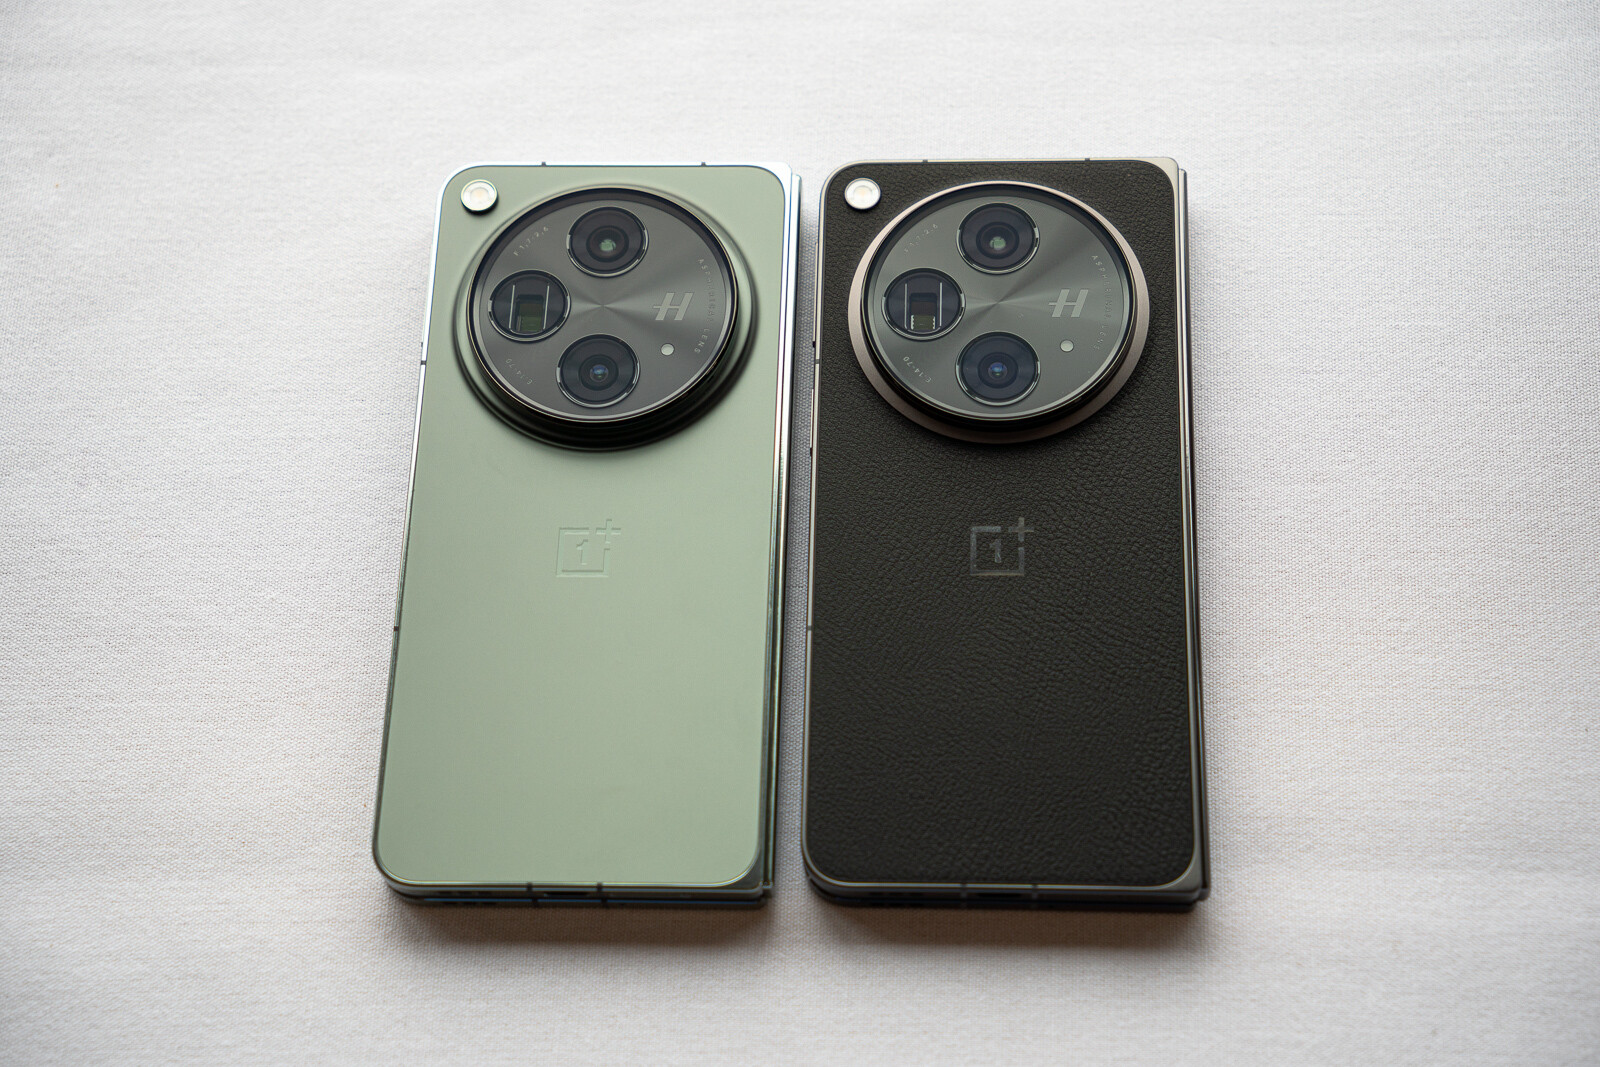 The OnePlus Open in Emerald Dusk and Voyager Black - OnePlus Open colors: all the official hues